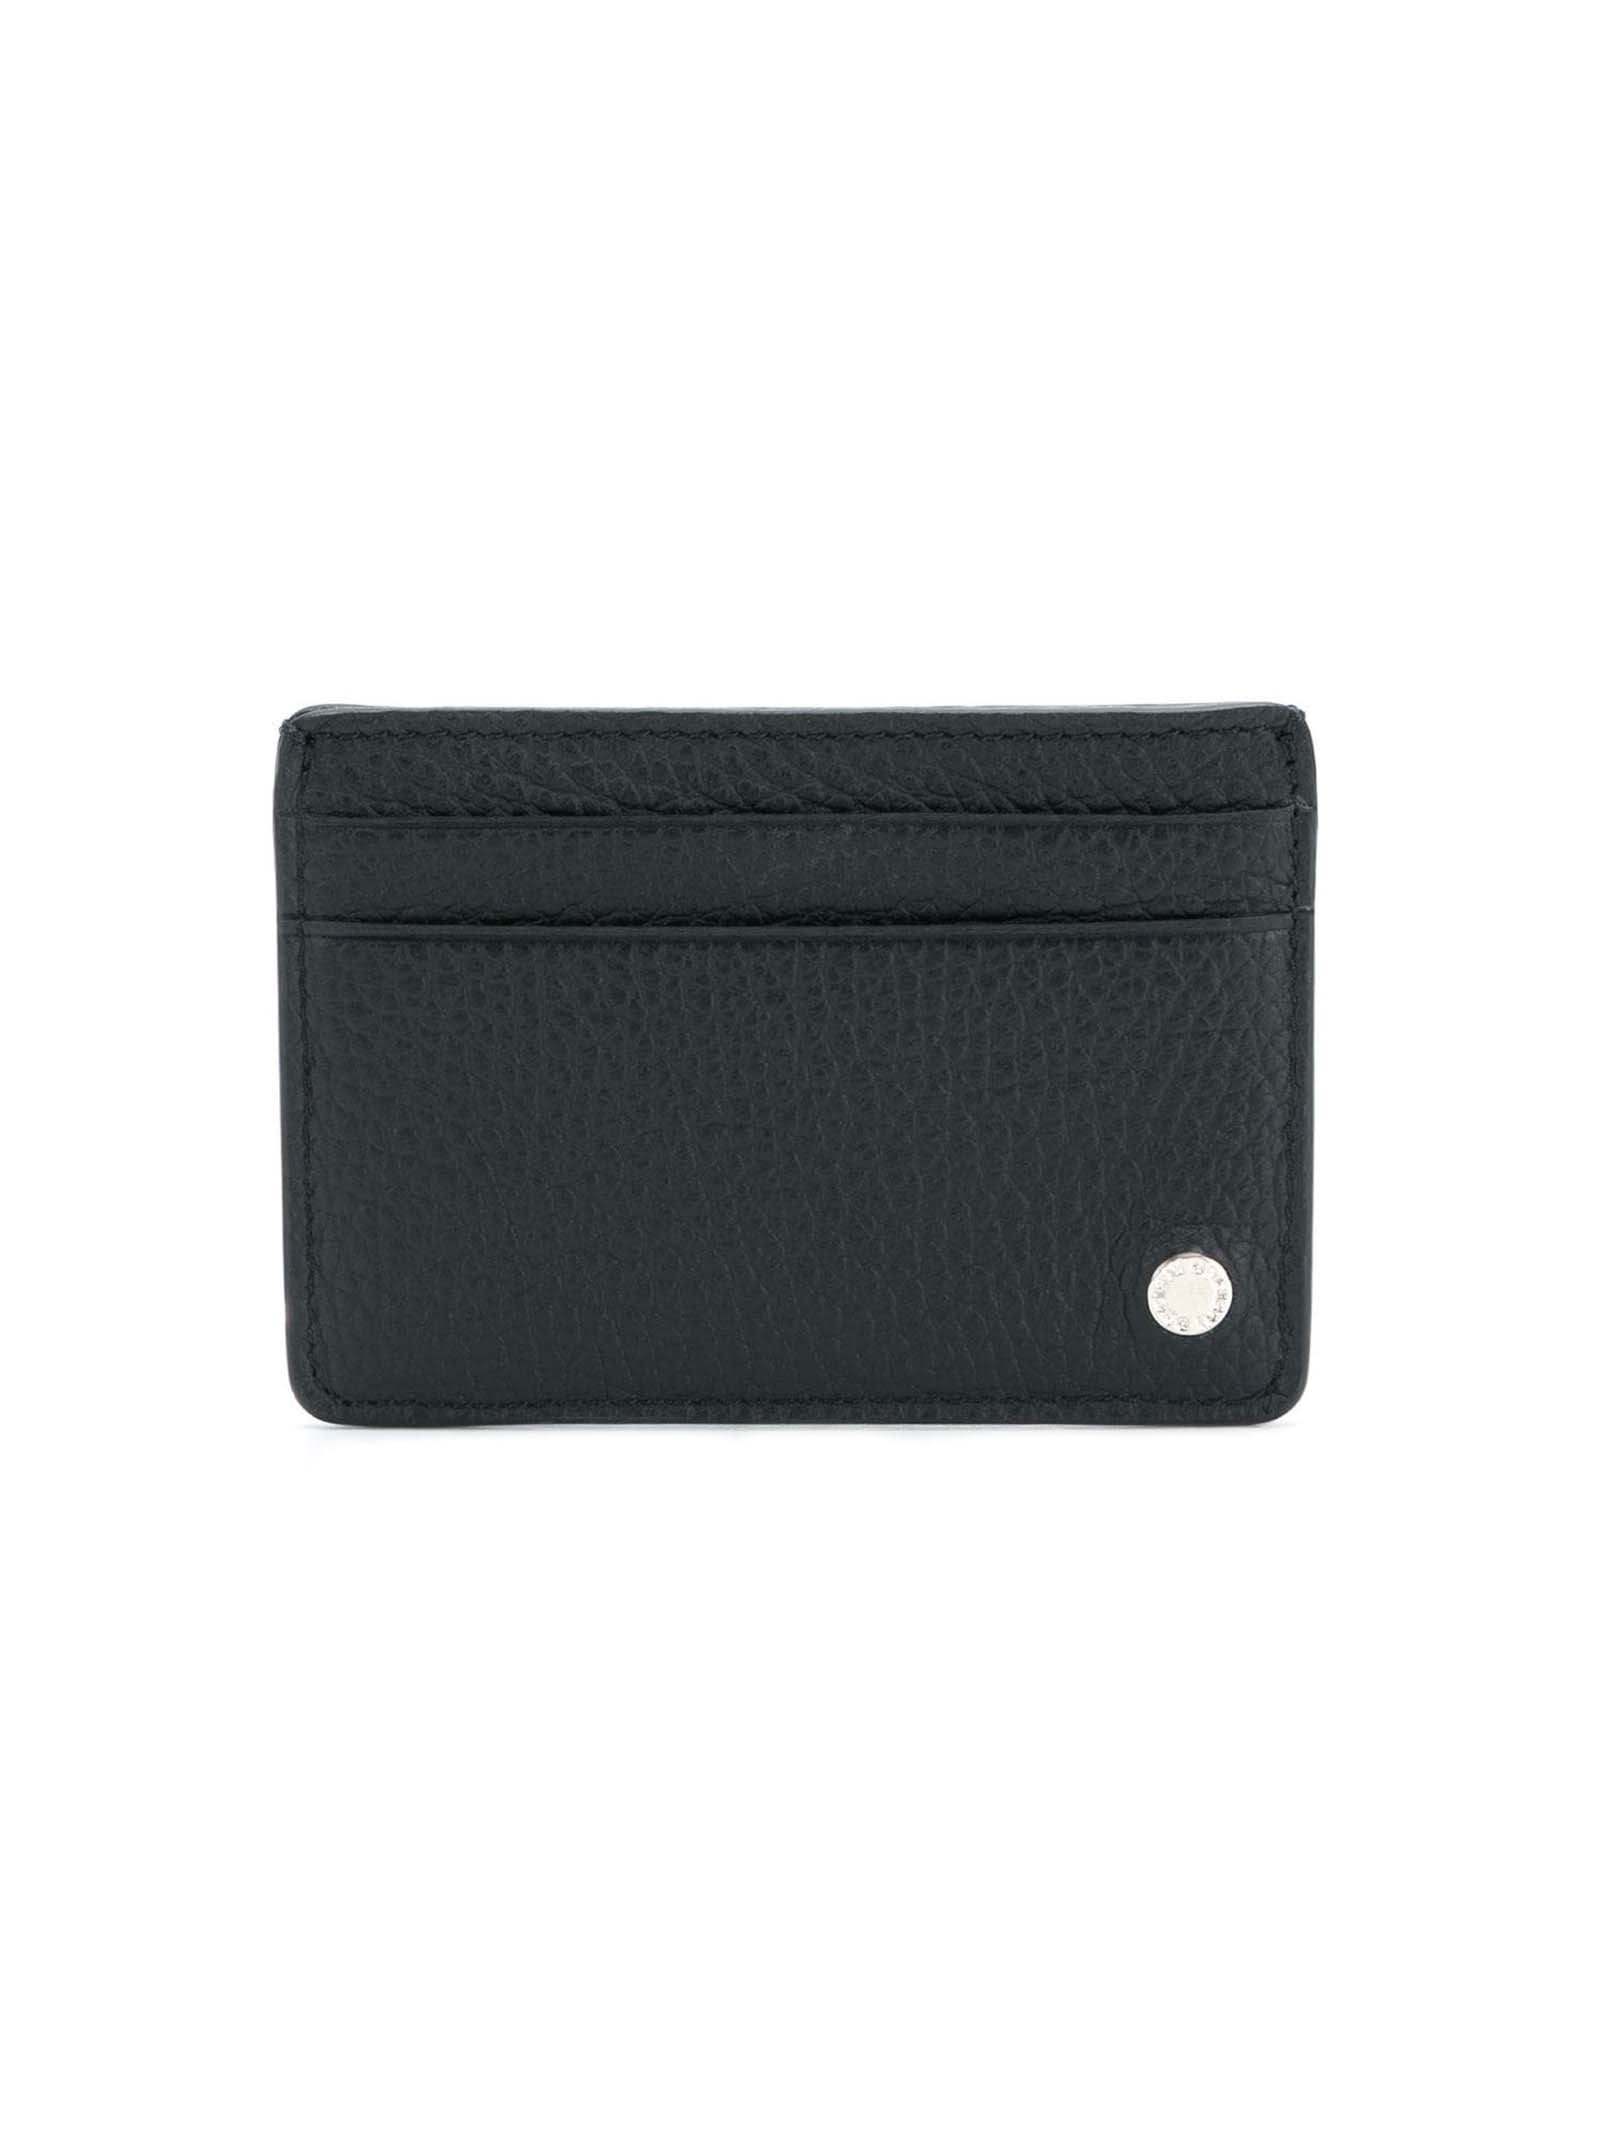 Orciani Black Leather Classic Card Holder